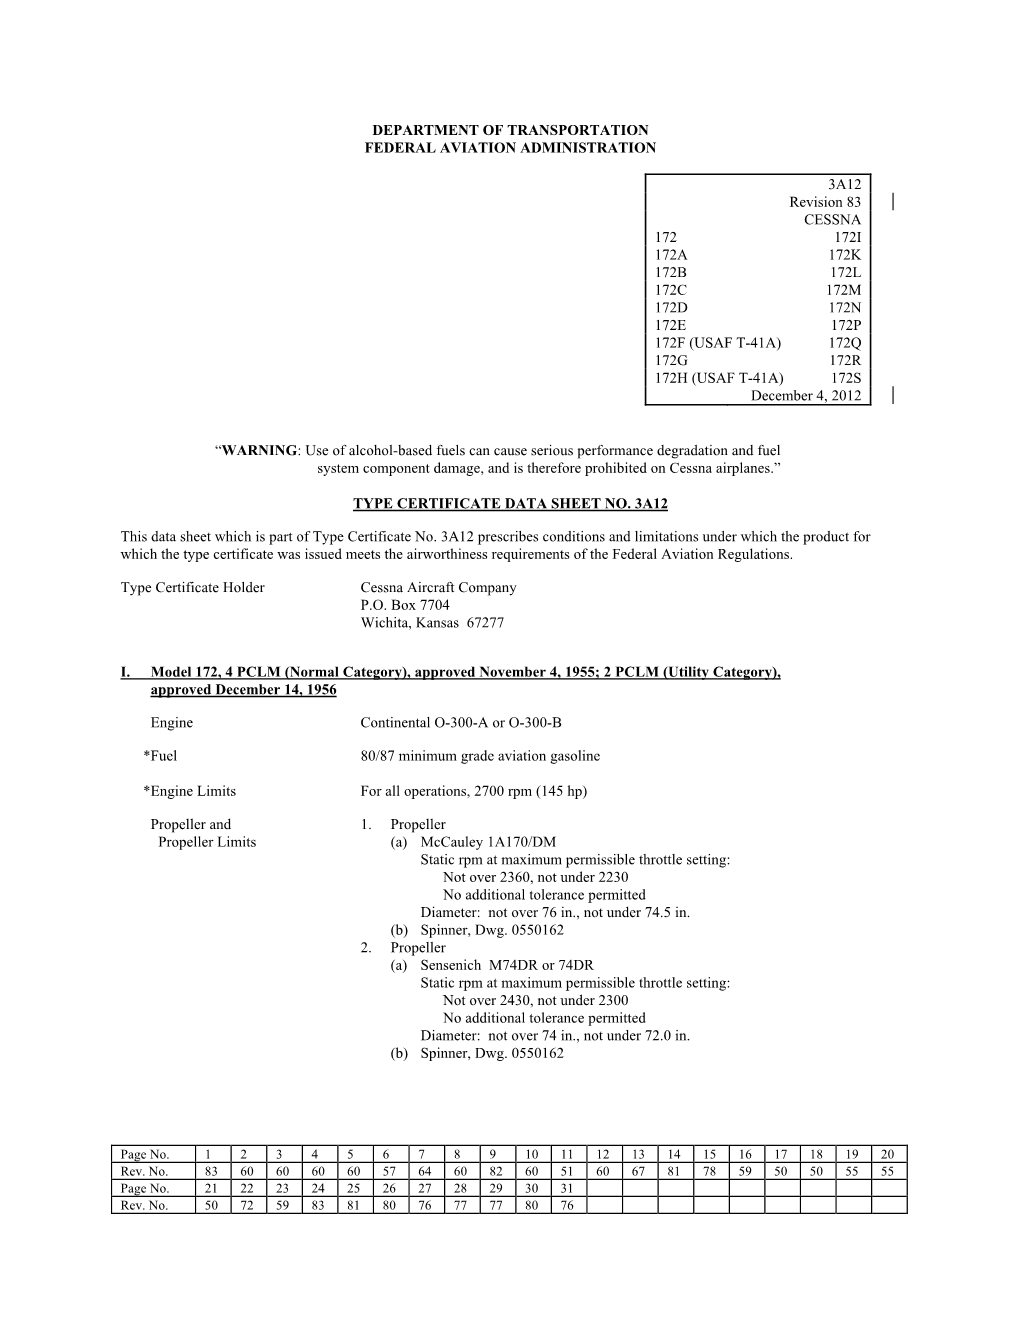 Example of a Type Certificate Data Sheet for a Cessna